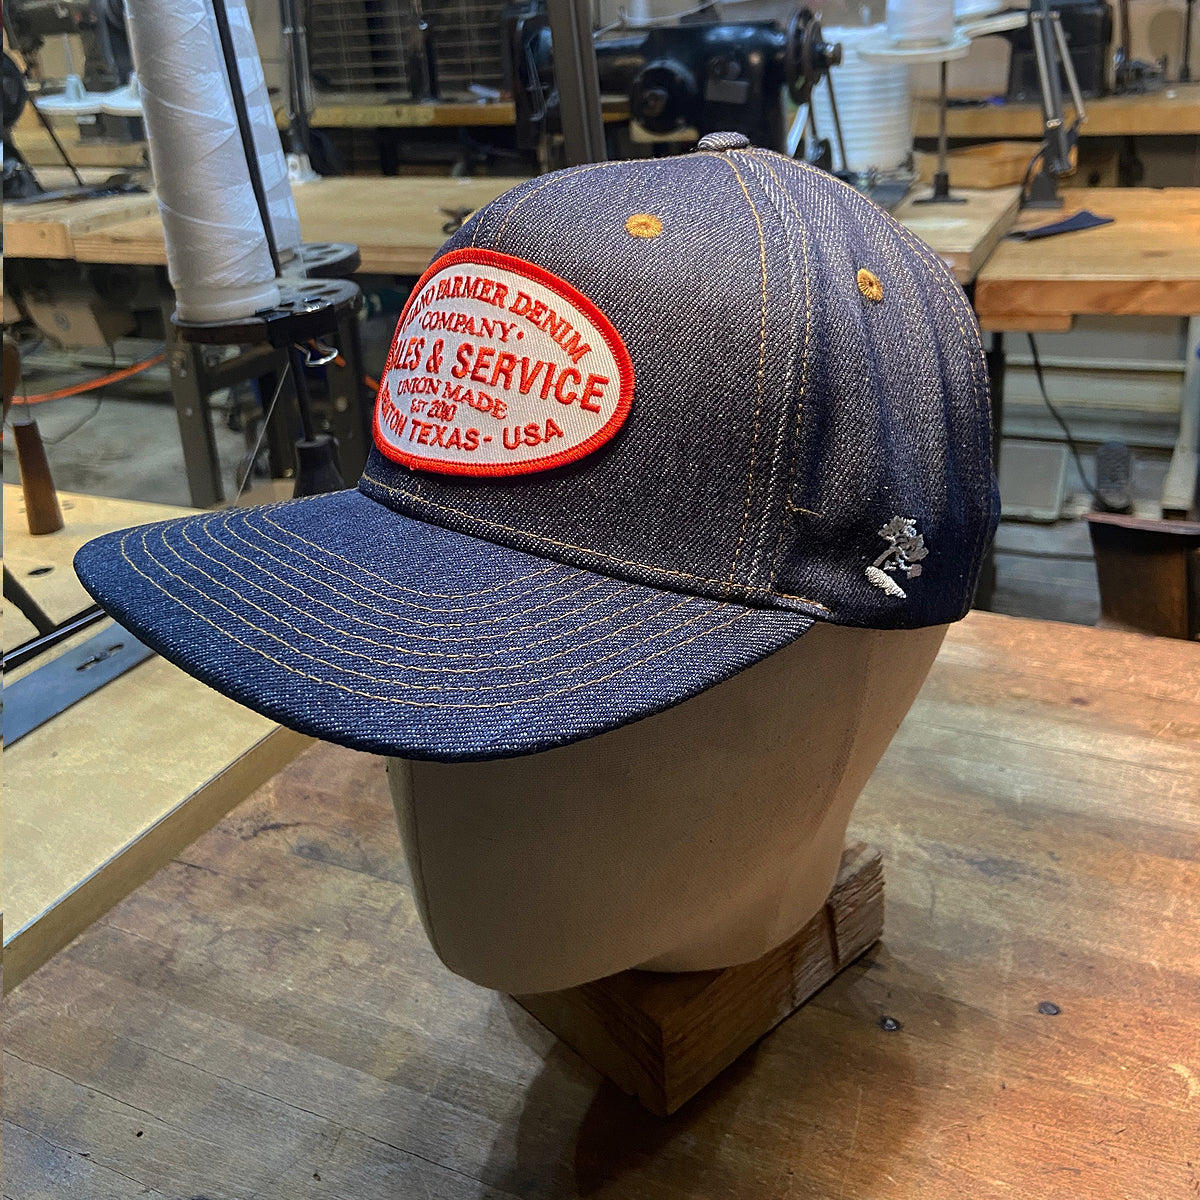 14oz Cone Mills Denim Snapback HAT CFDCo Sales and Service Patch